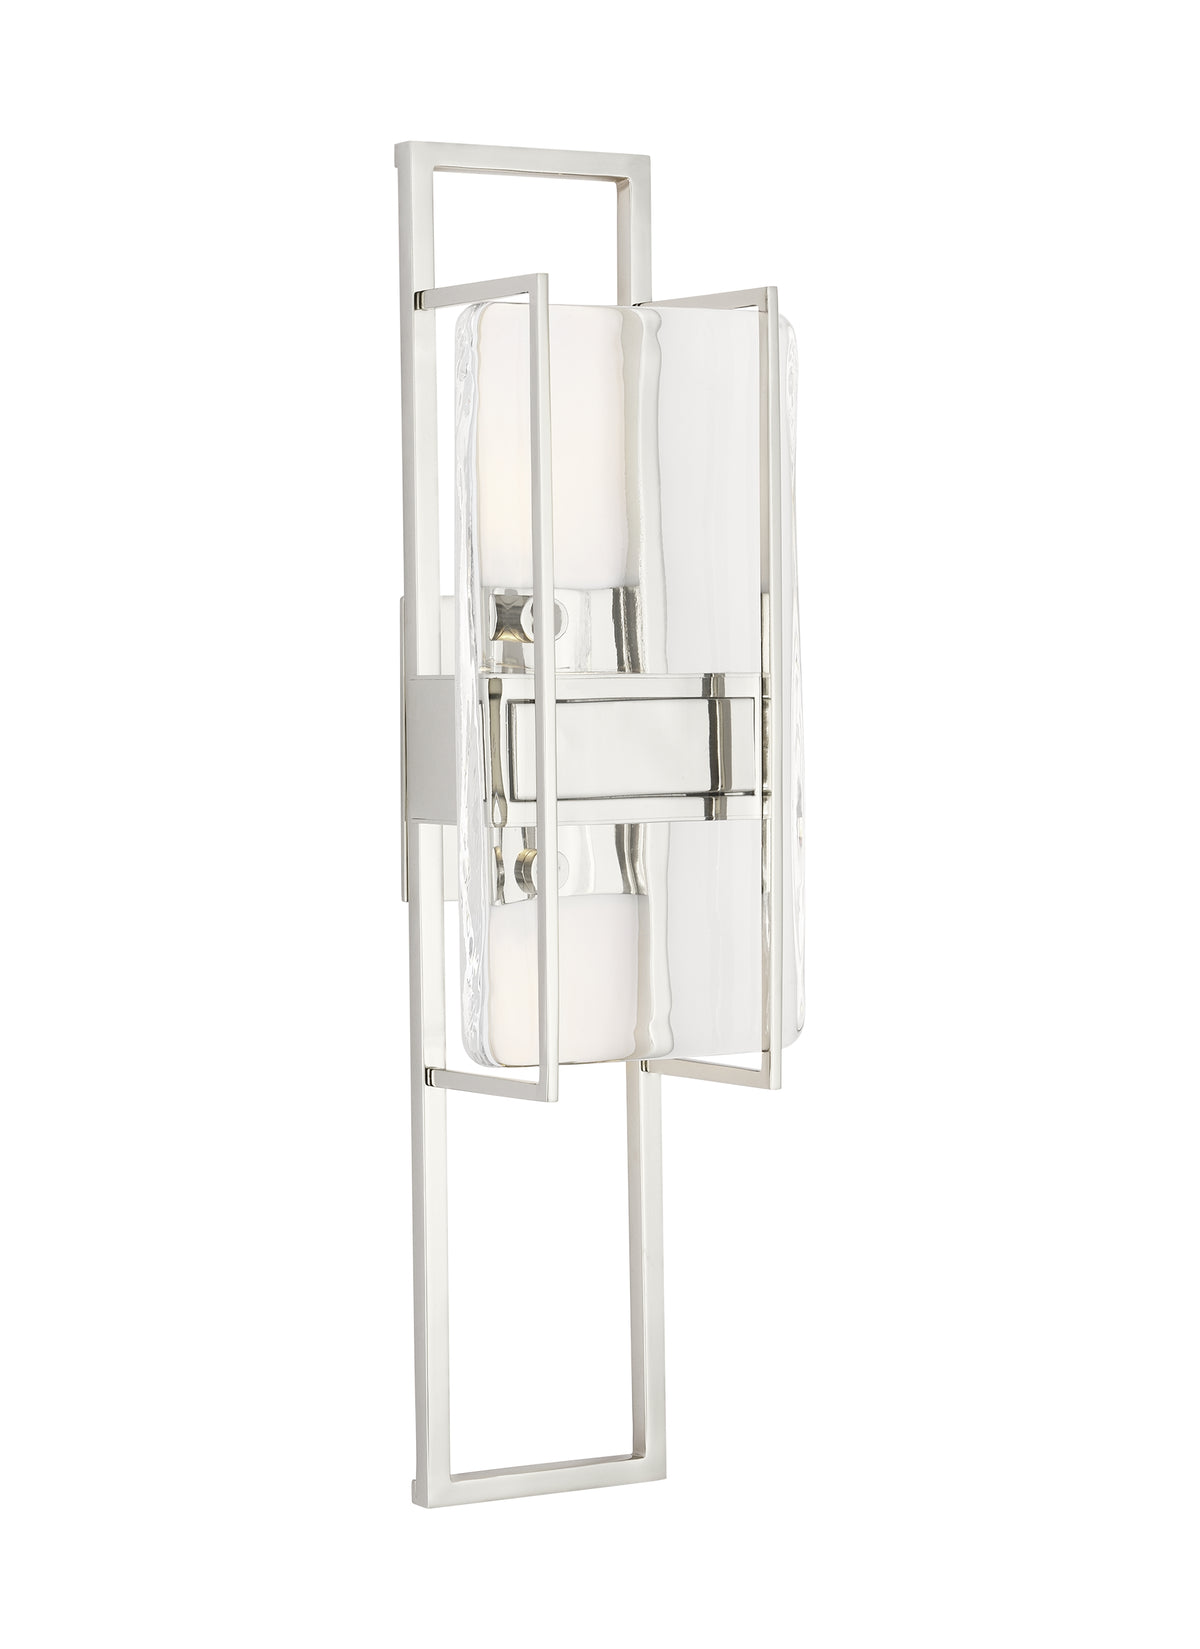 Tech Lighting, Duelle Wall Sconce, Polished Nickel